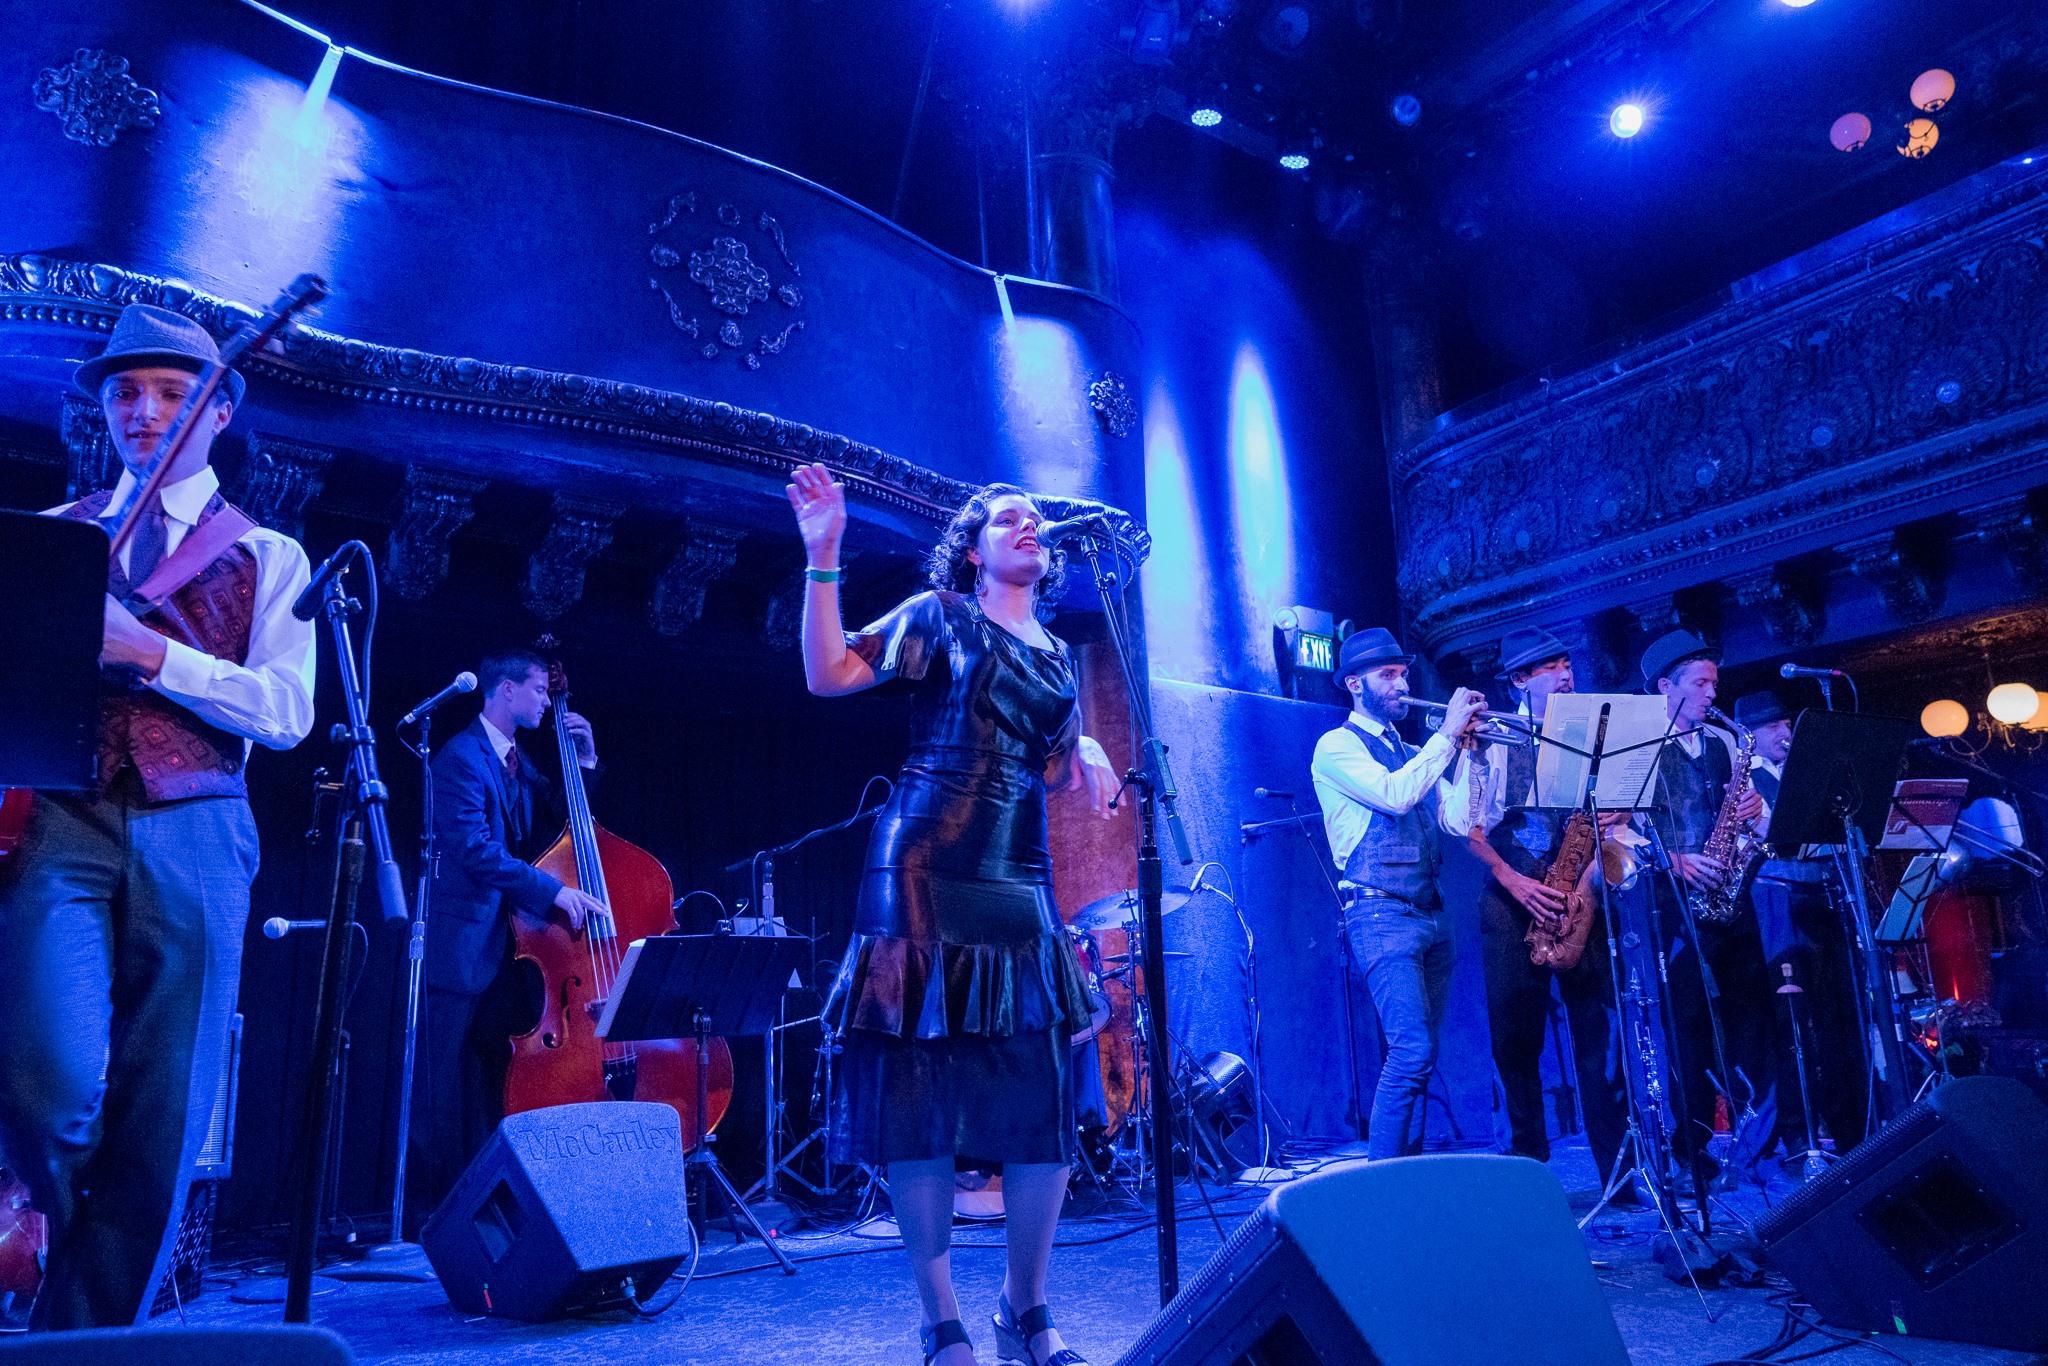 Justine Lucas headlining The Great American Music Hall in 2015